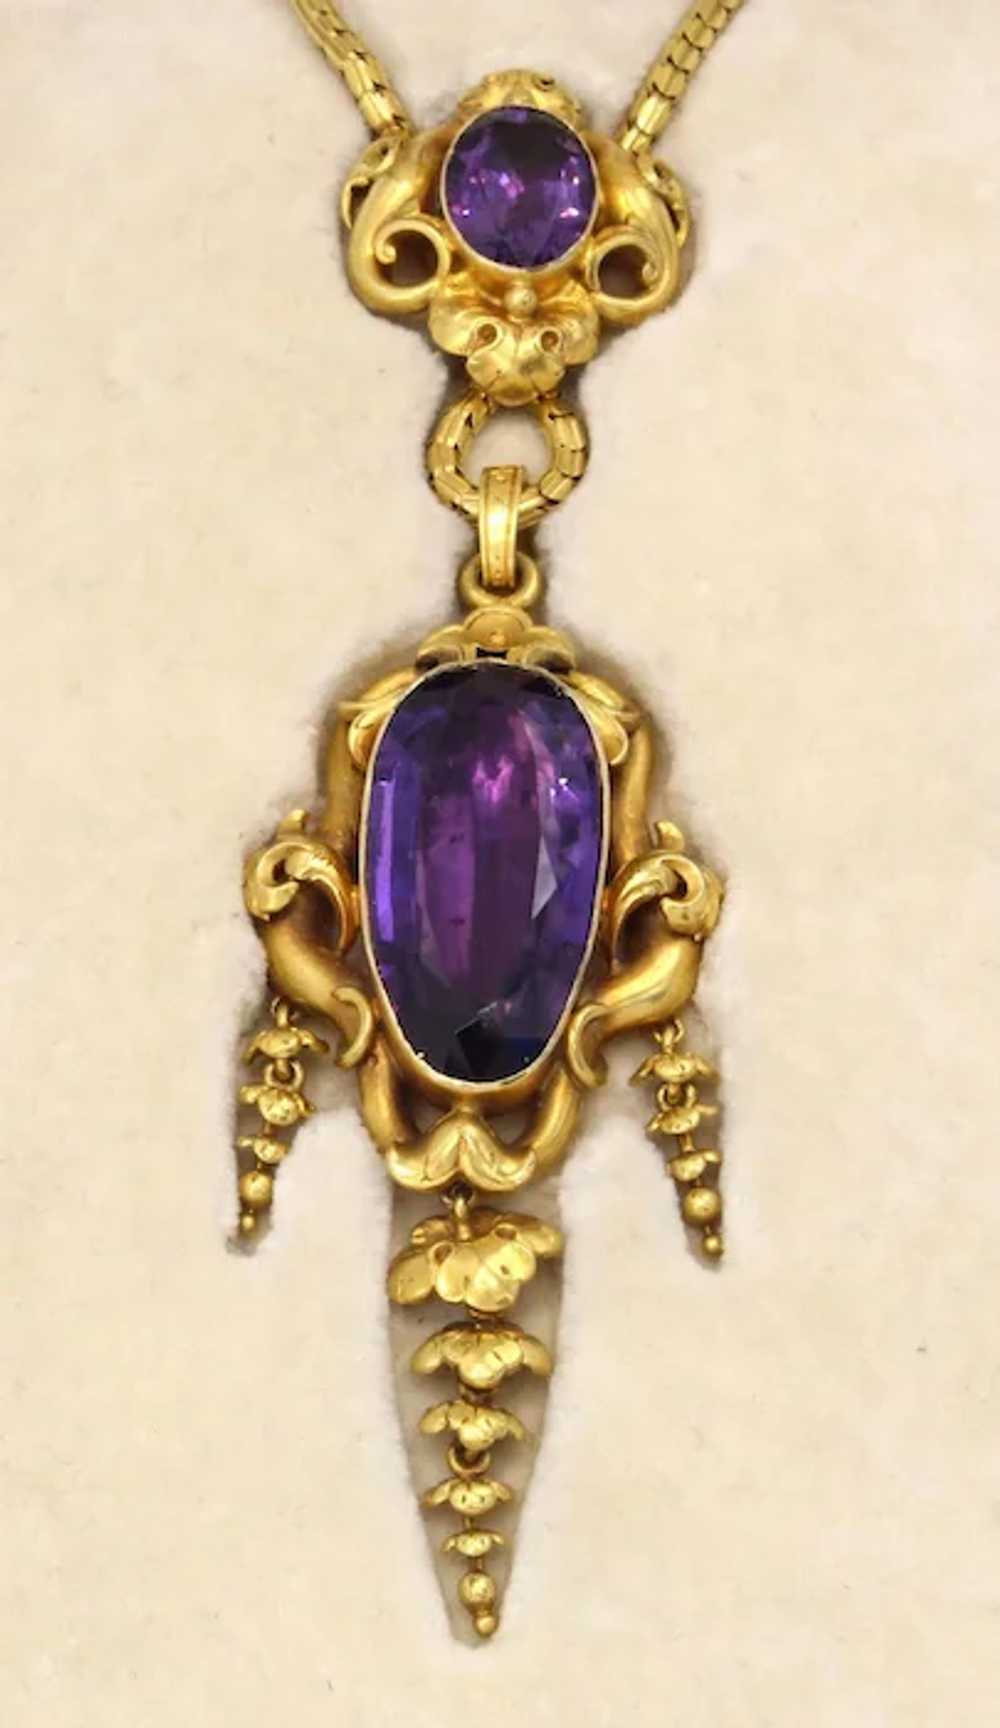 Victorian Amethyst Gold Pendant Necklace - image 3